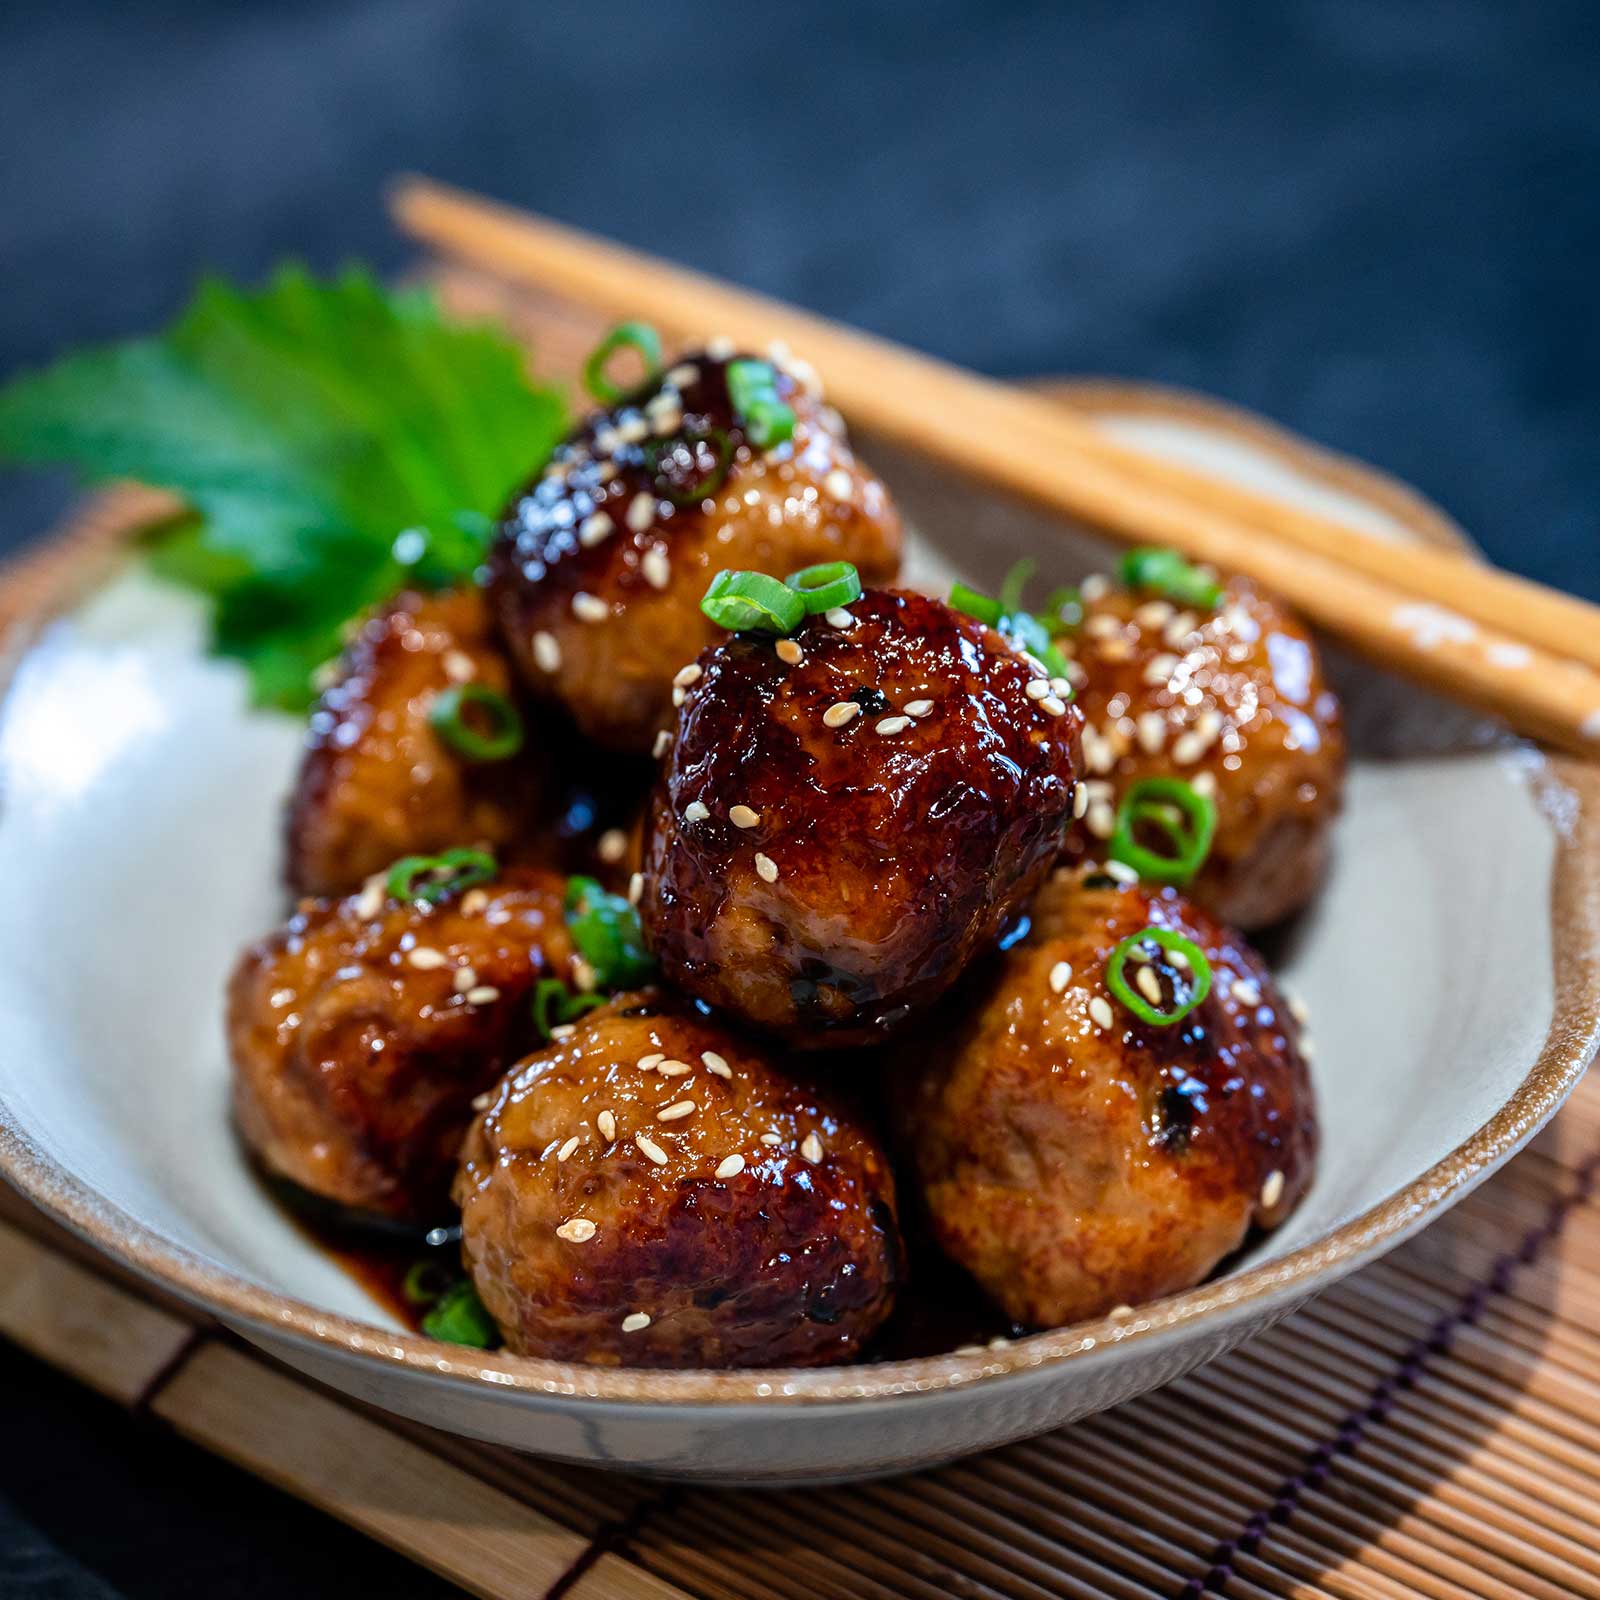 A ceramic bowl is filled with gluten-free japanese chicken meatballs. The light blue bowl is resting on a bamboo place mat and wooden chopsticks rest on the side of the bowl. The meatballs have been sprinkled with seseame seeds.